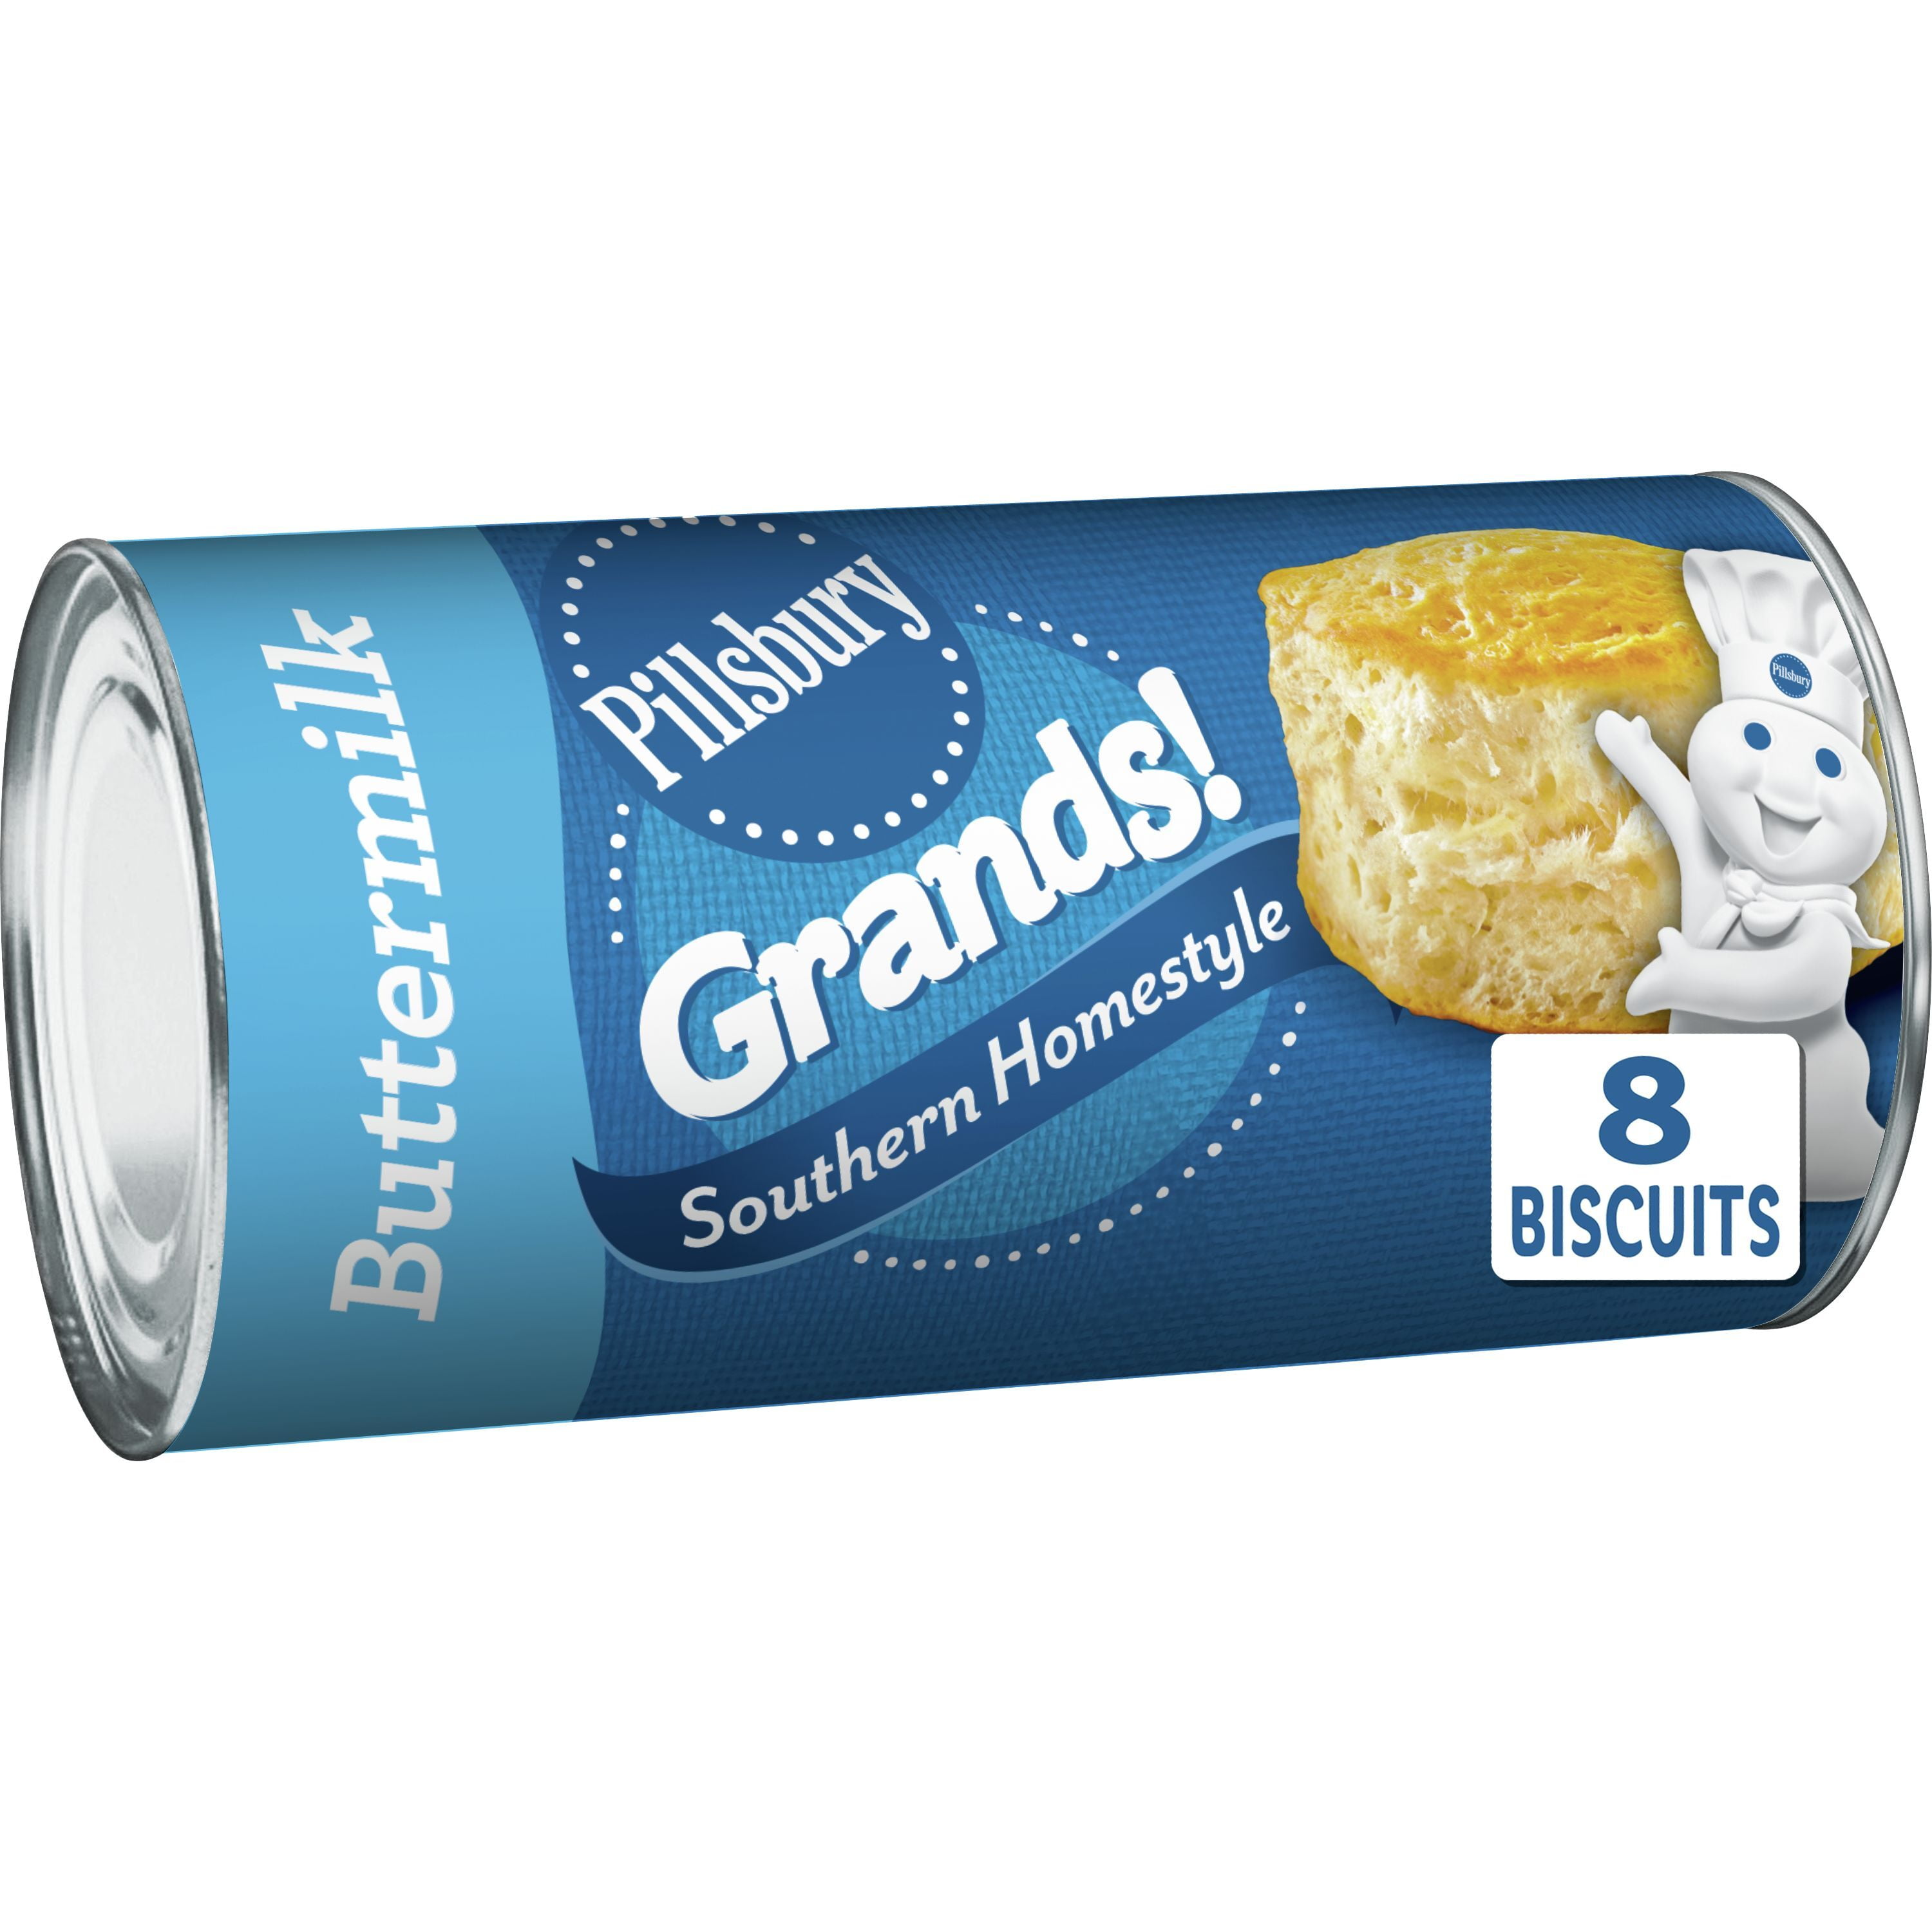 Pillsbury Grands! Southern Homestyle Buttermilk Biscuits, 8 ct., 16.3 oz.